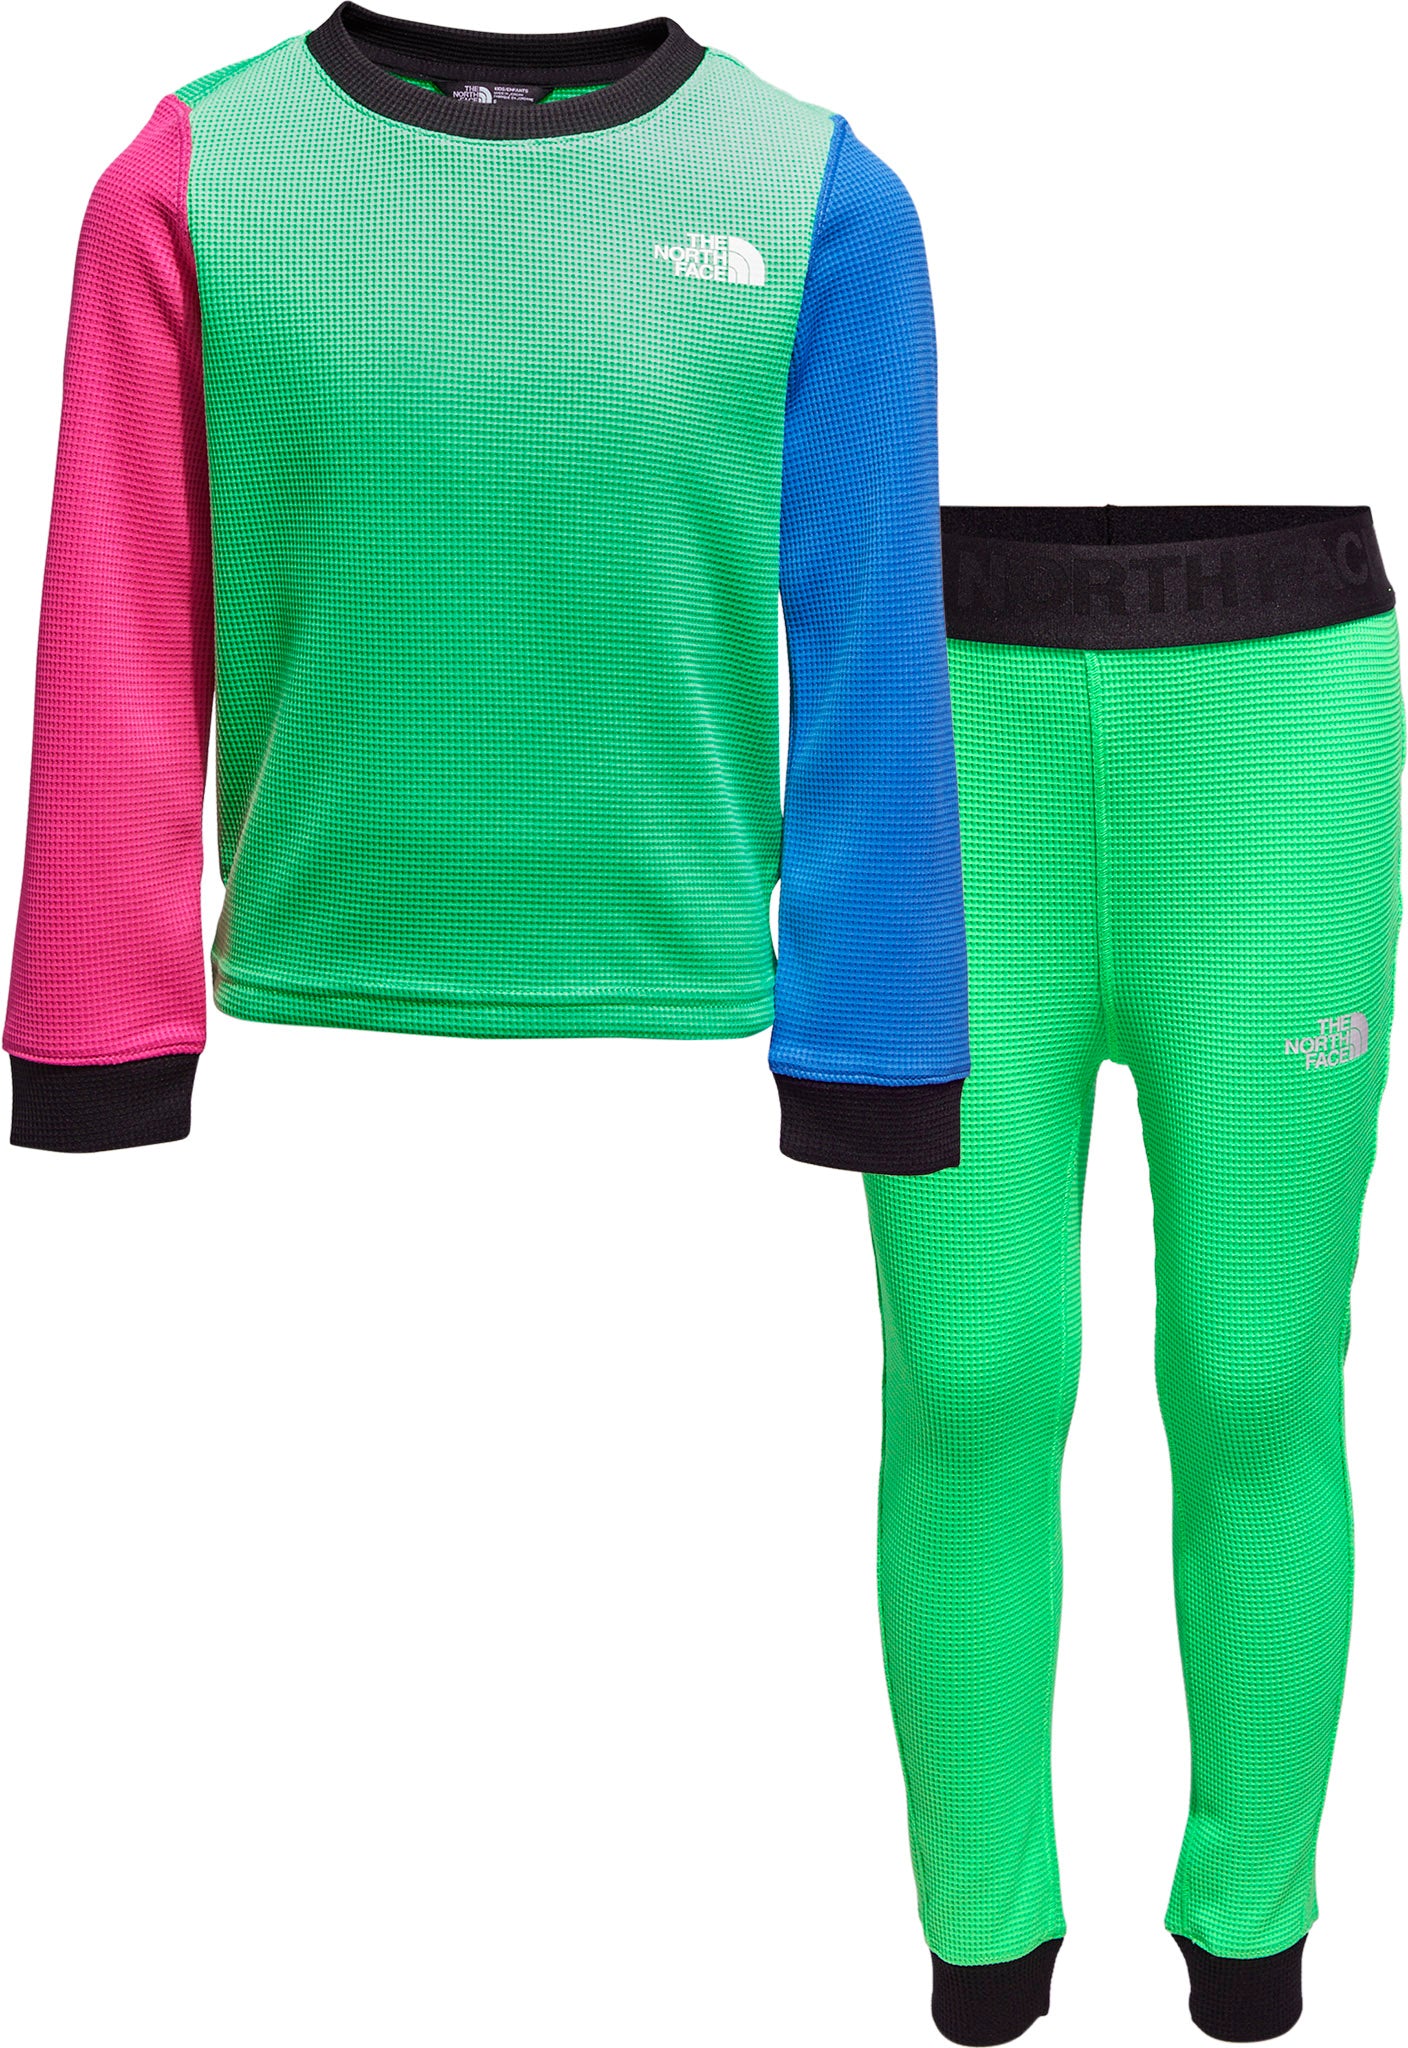 The North Face Waffle Base Layer Set - Kids | Altitude Sports